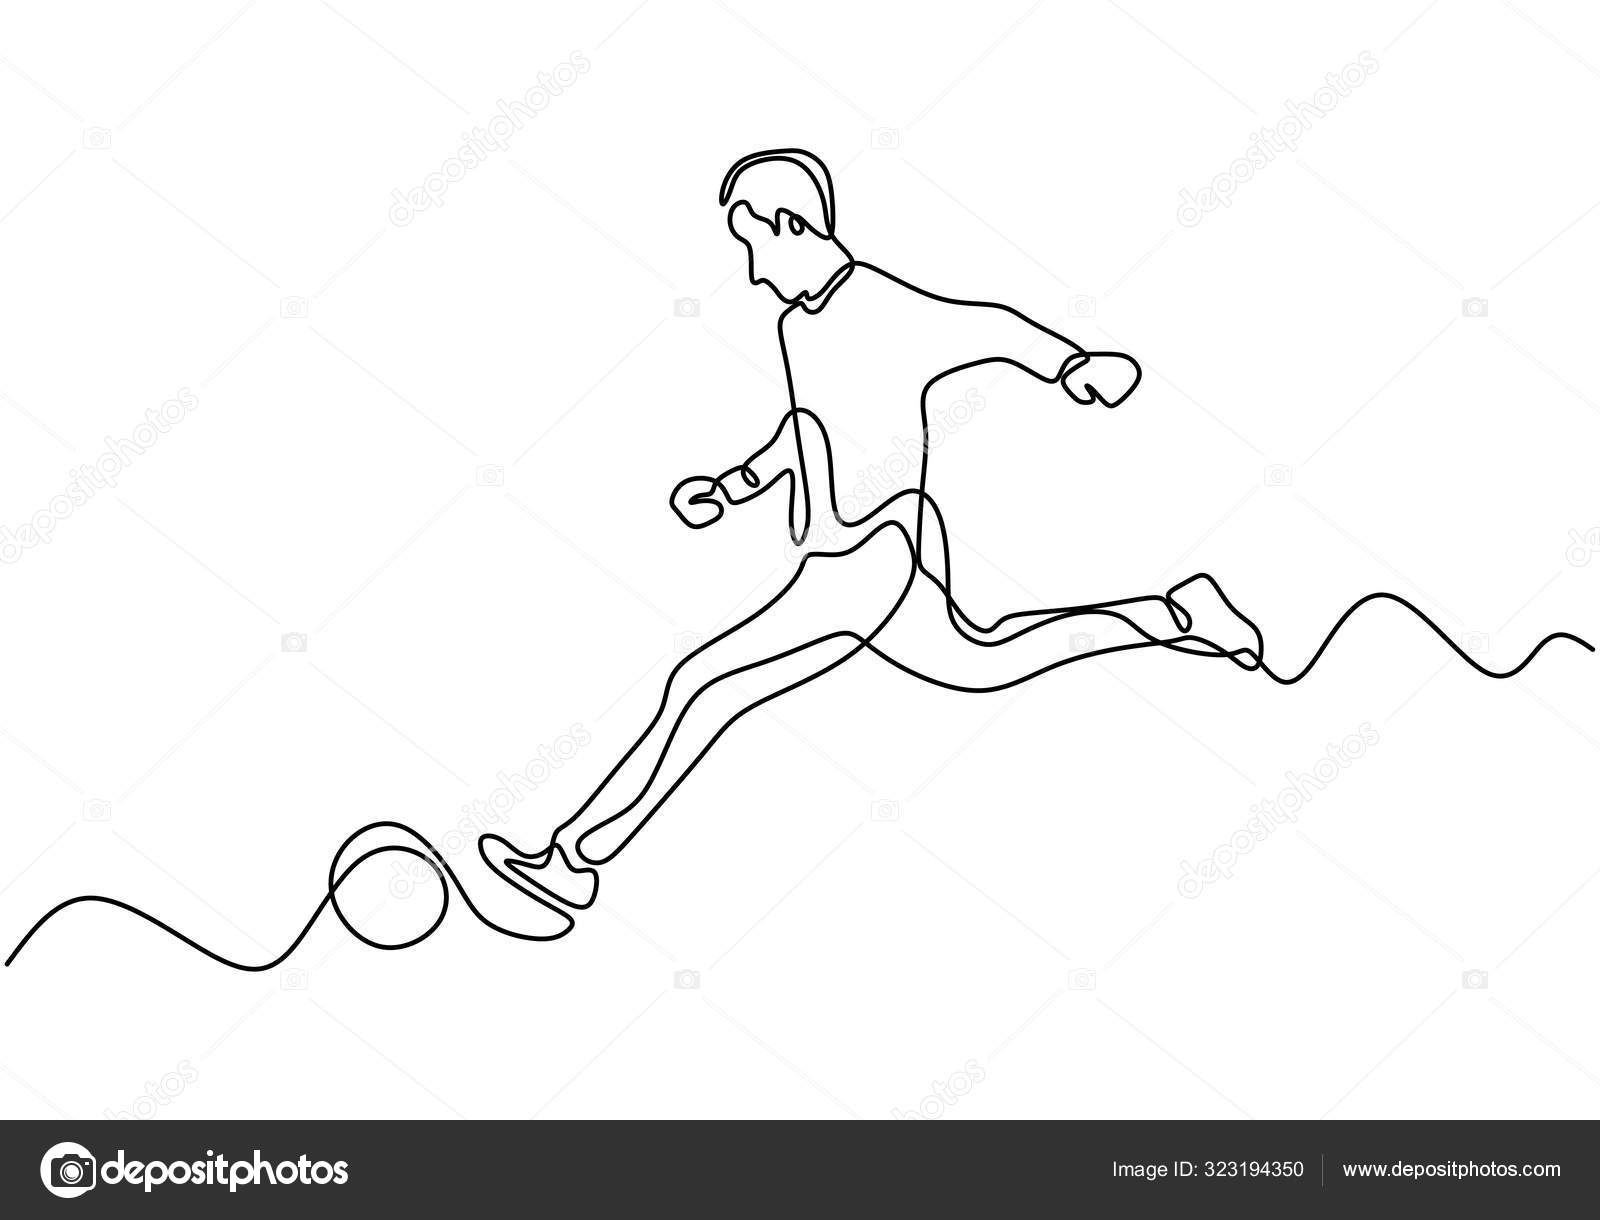 15159 Playing Football Sketch Images Stock Photos  Vectors  Shutterstock